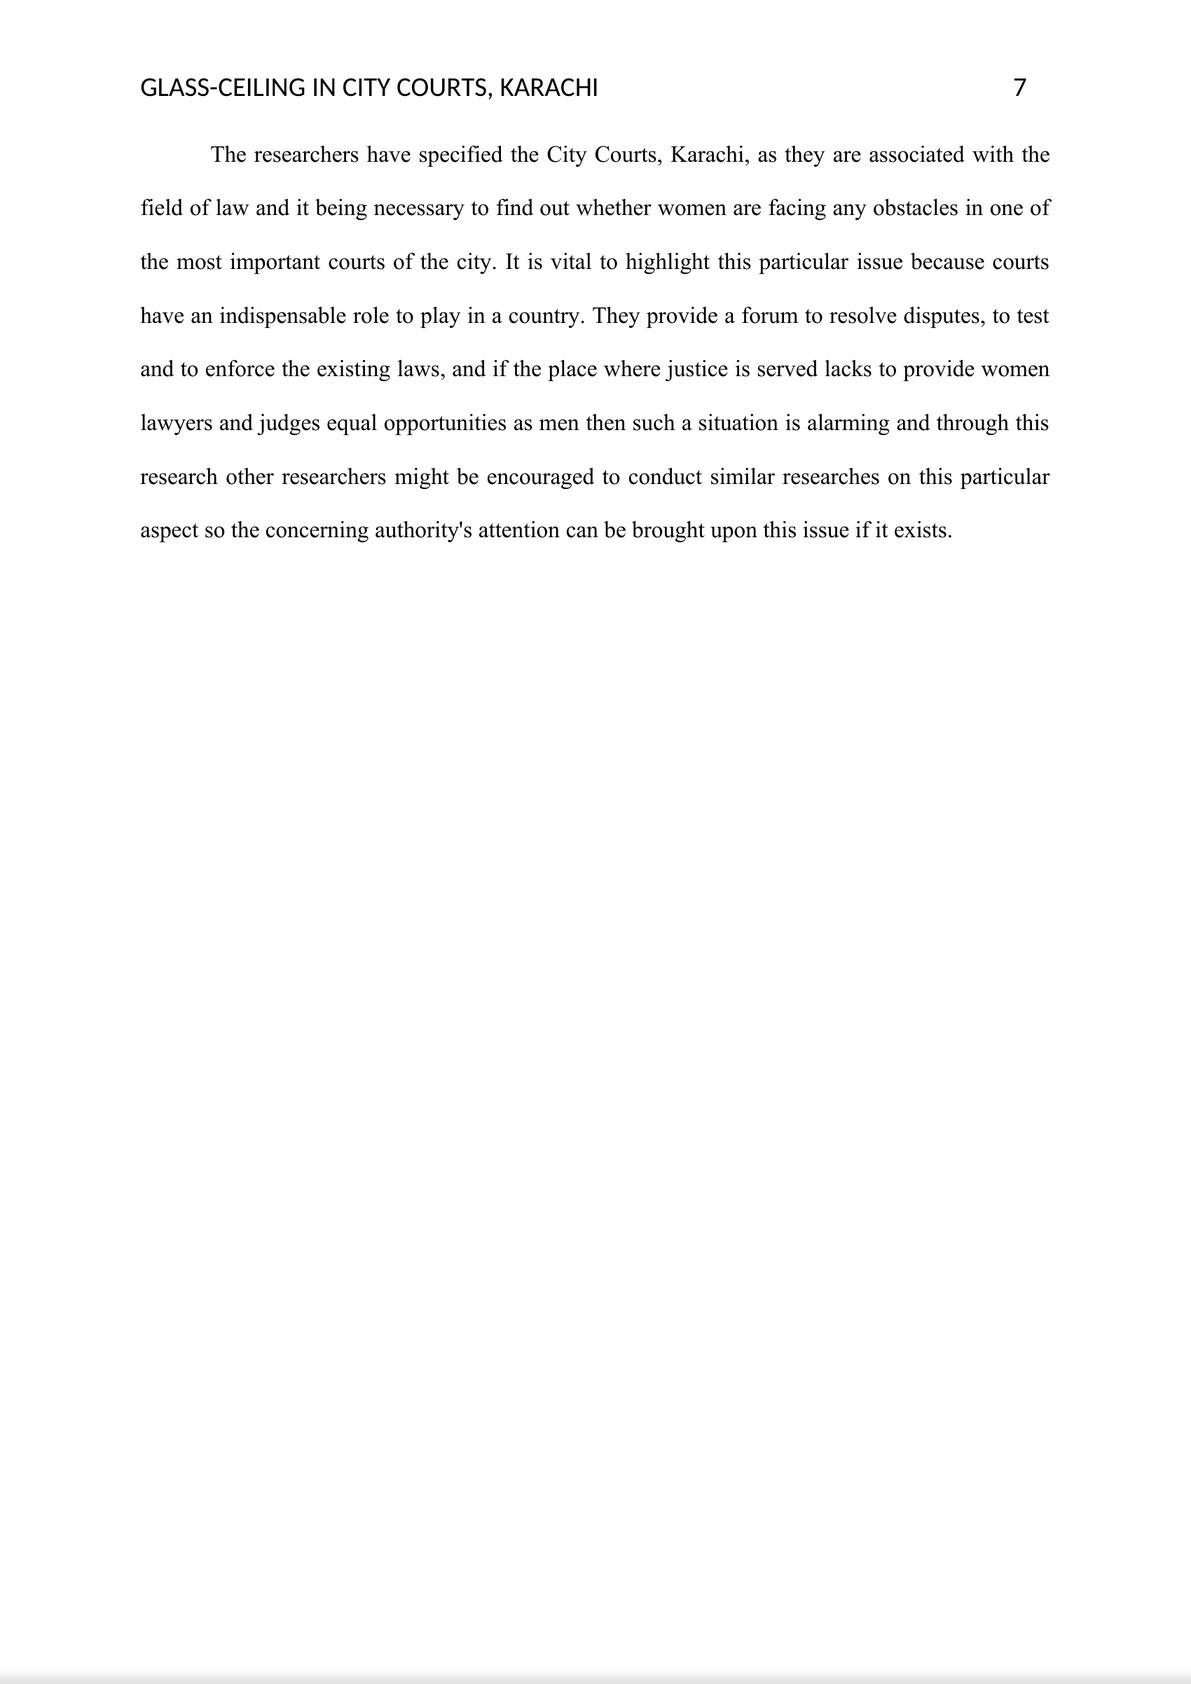 Research Paper - Existence of Glass-Ceiling in City Courts, Karachi-7